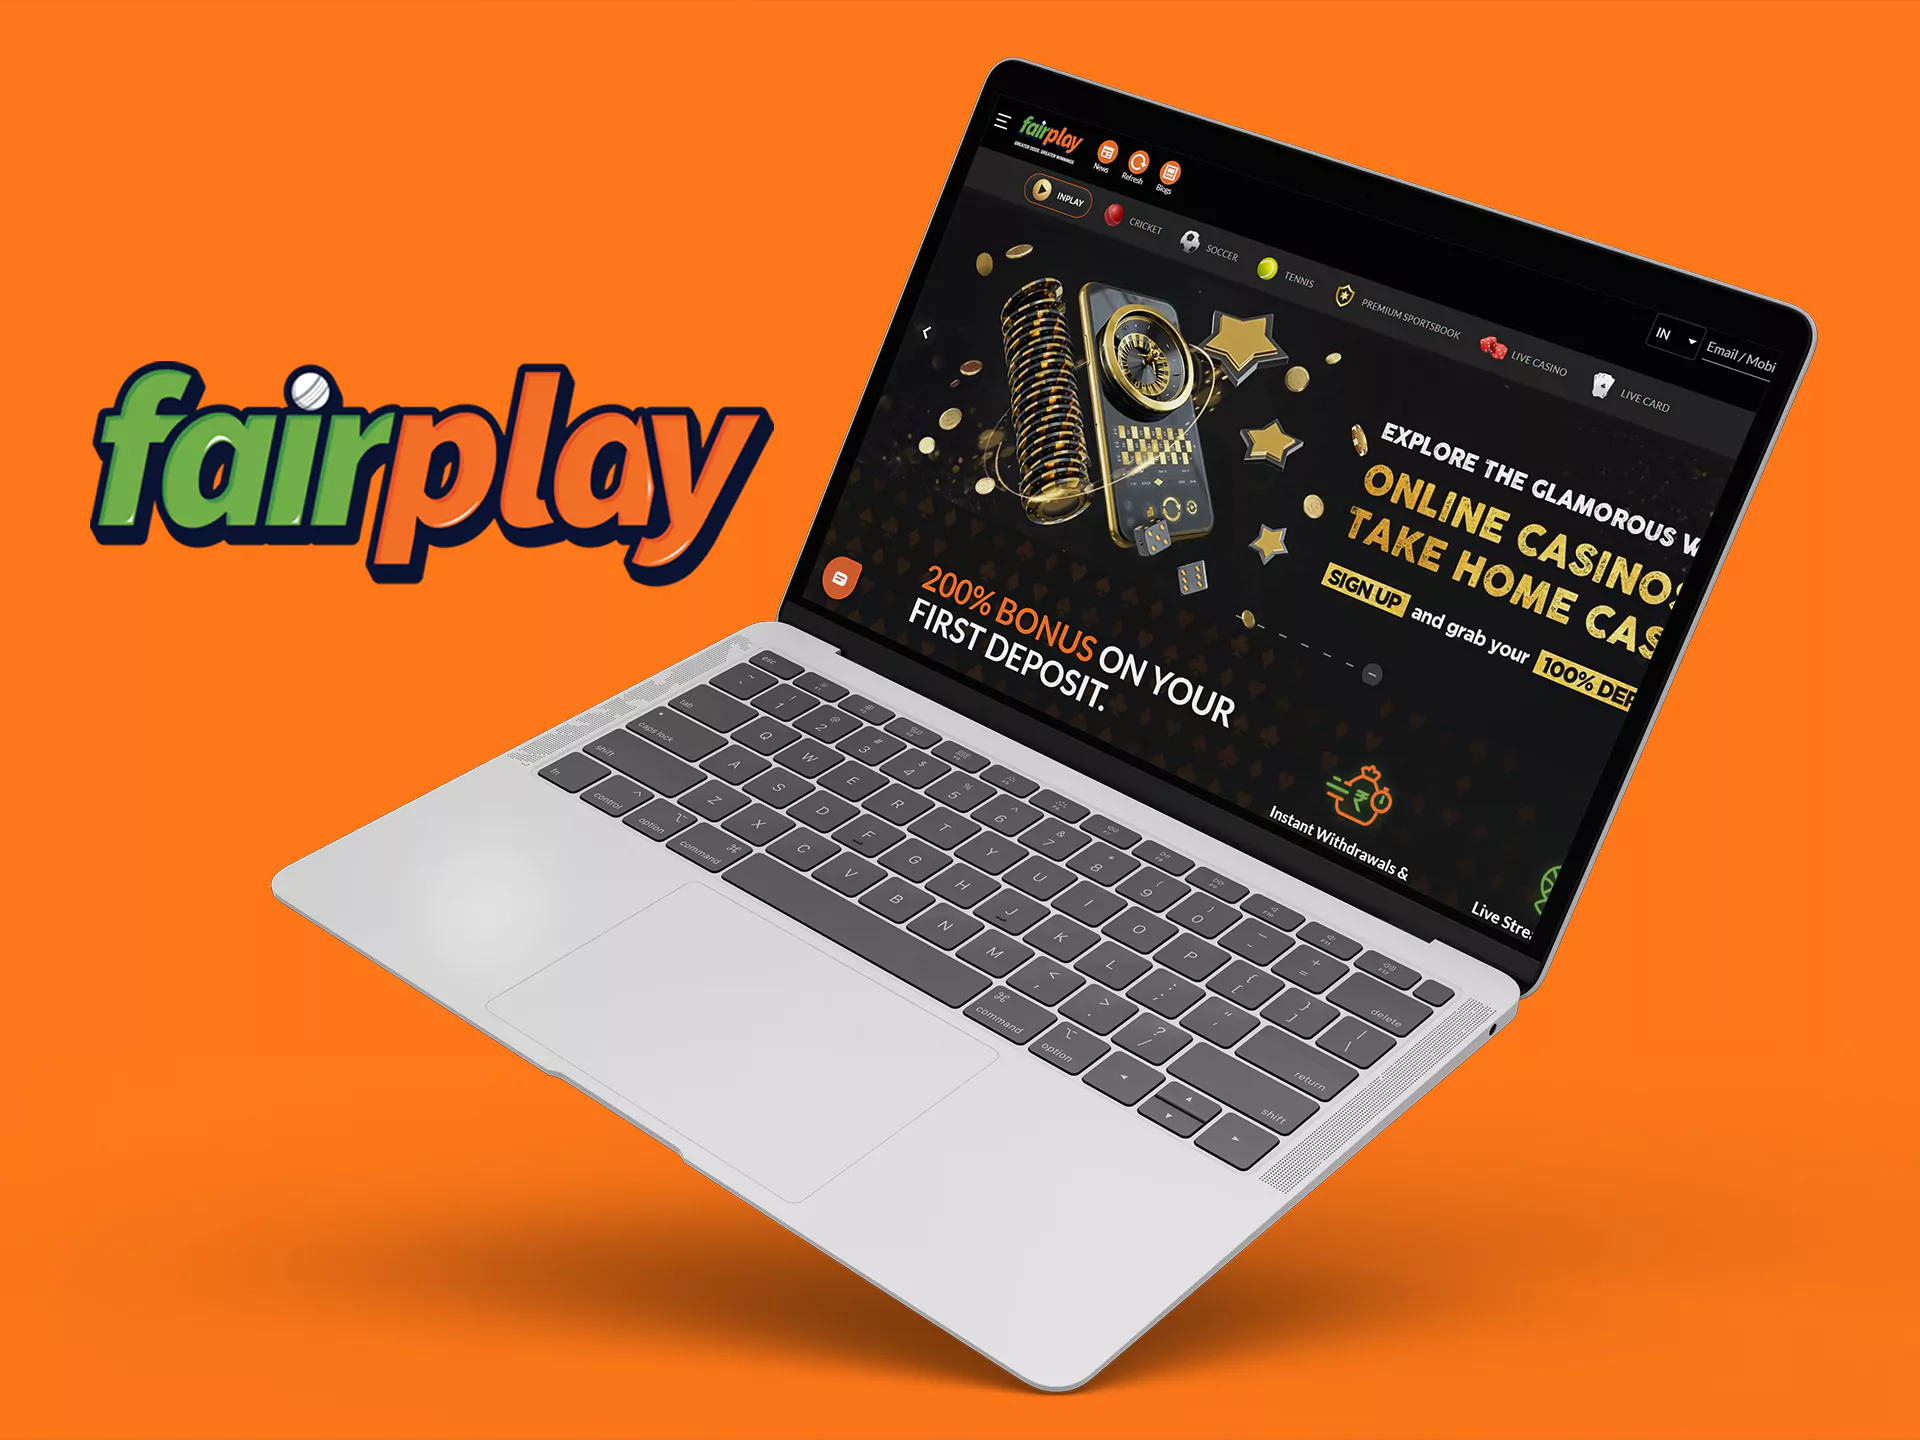 Fairplay India has a official website visit here.